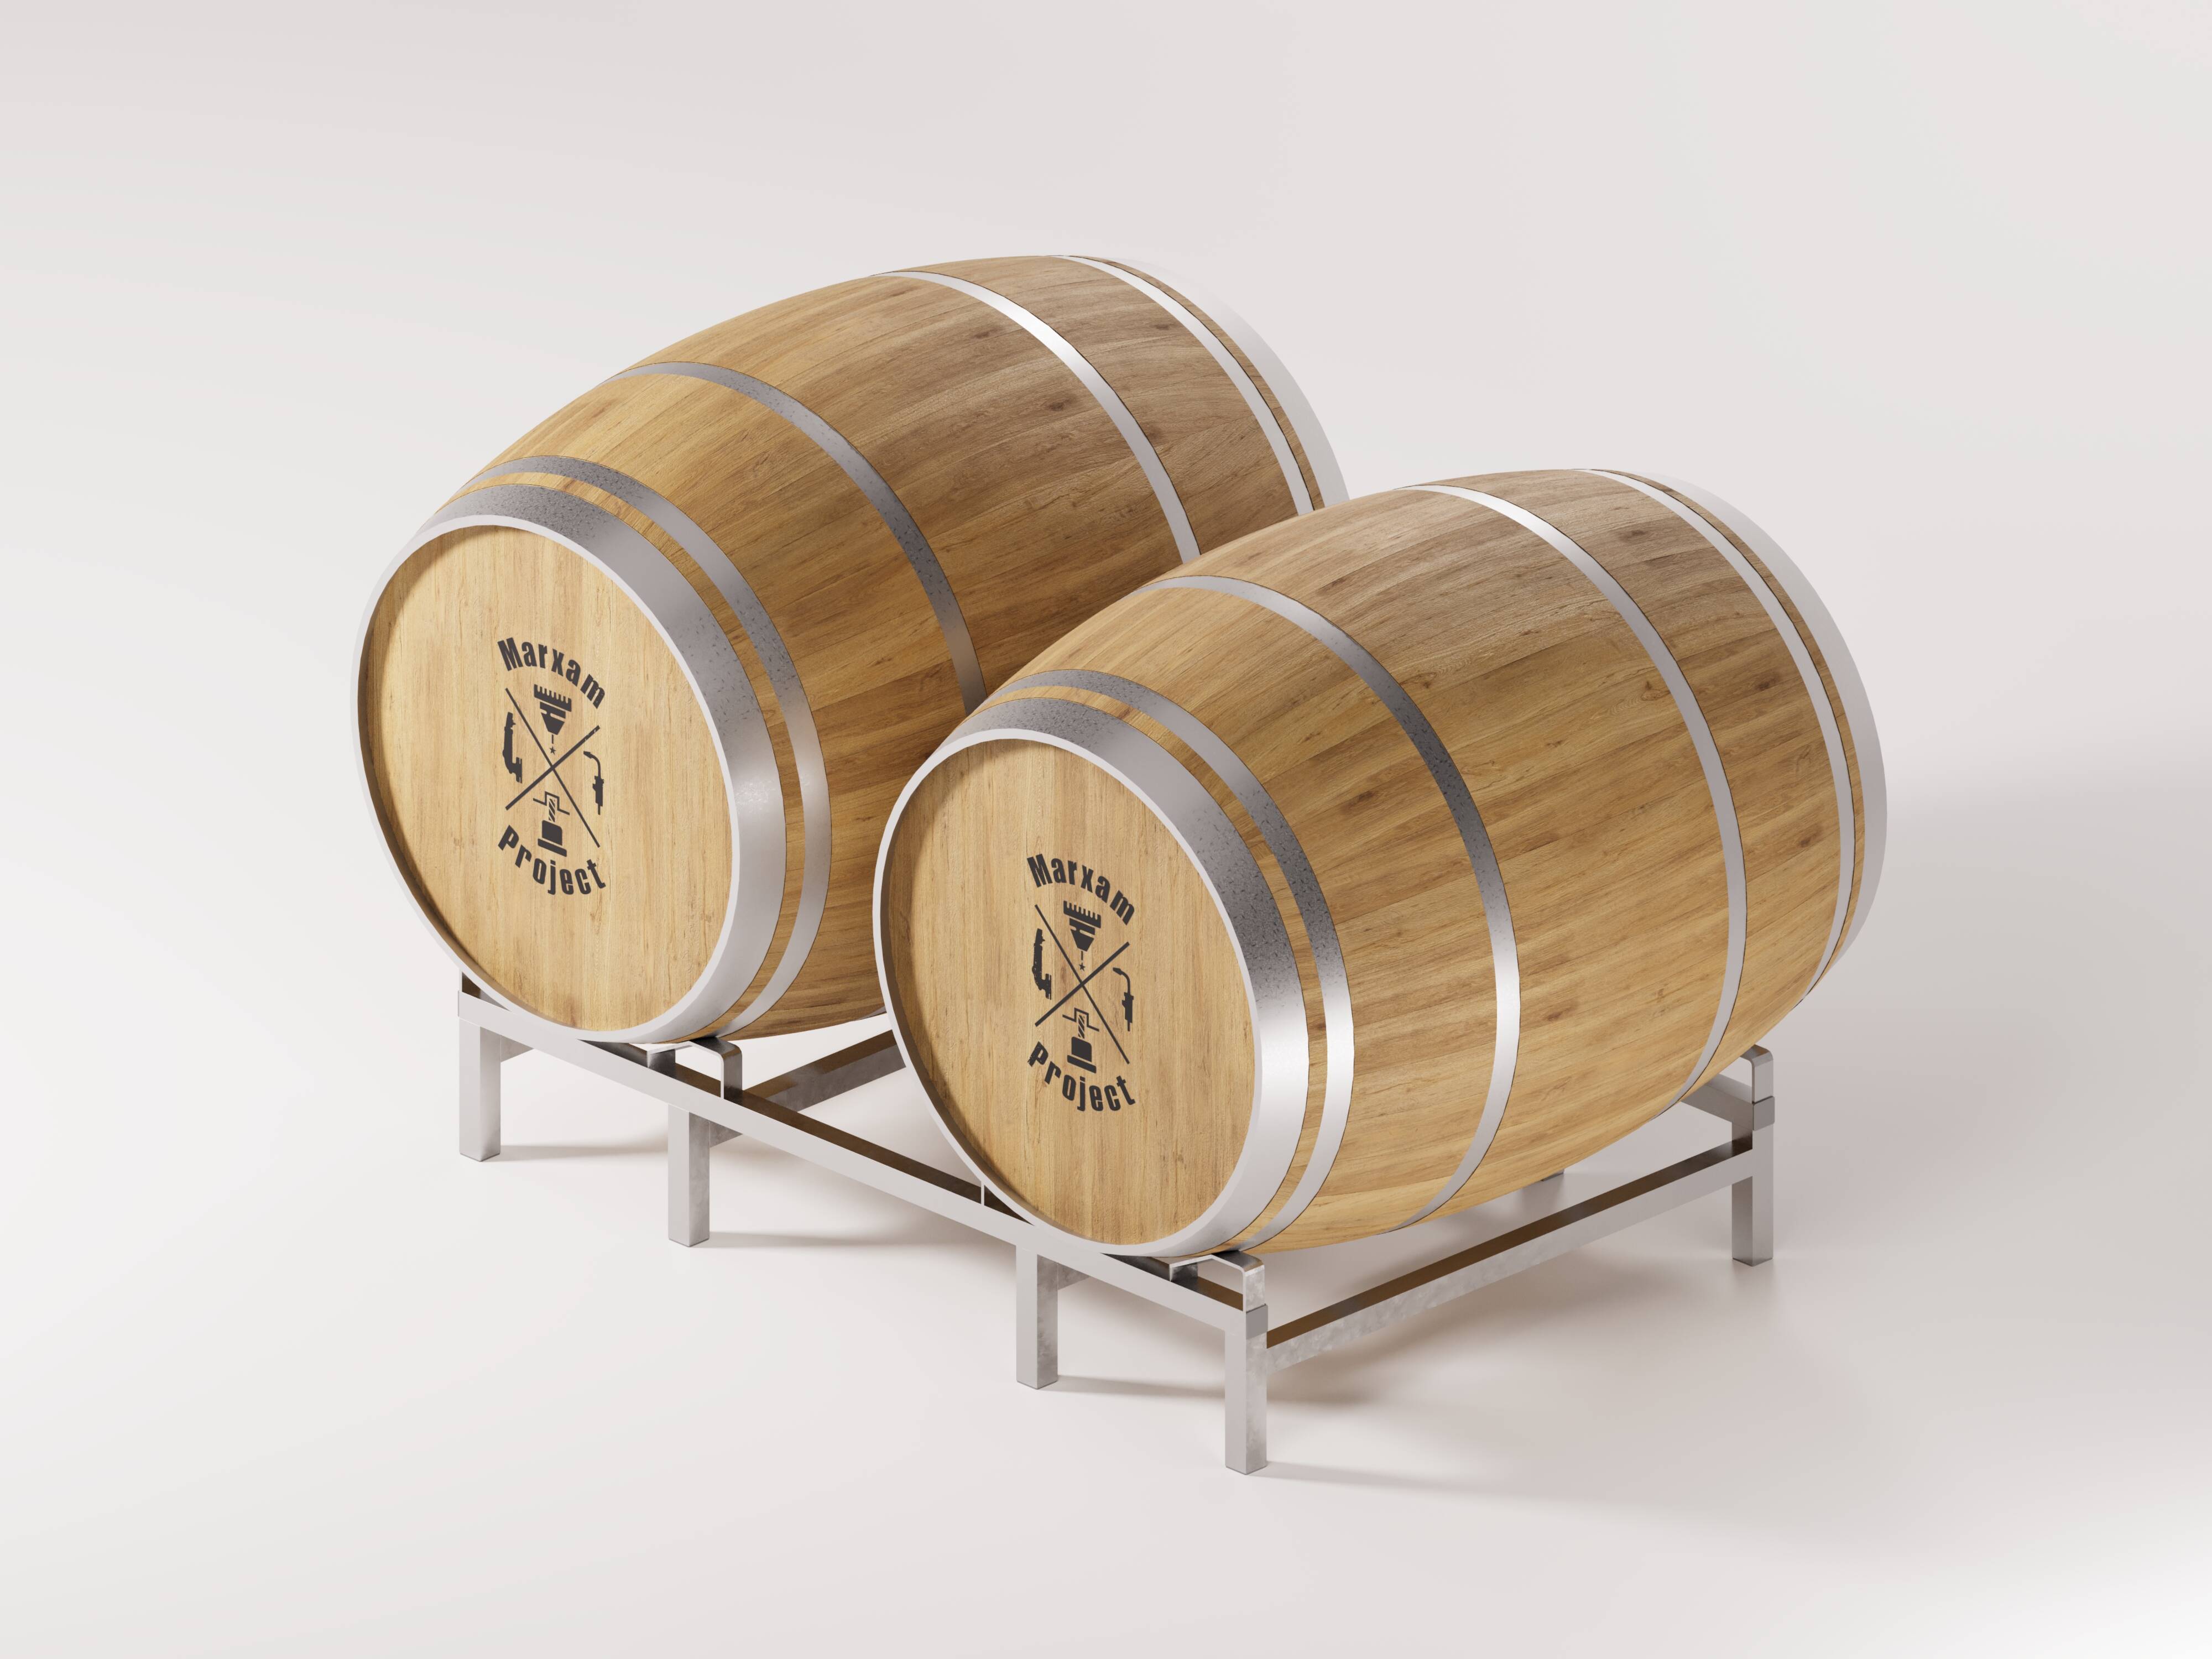 The image depicts a flawless white background showcasing a barrel stand holding two carefully preserved and firmly secured wooden barrels.